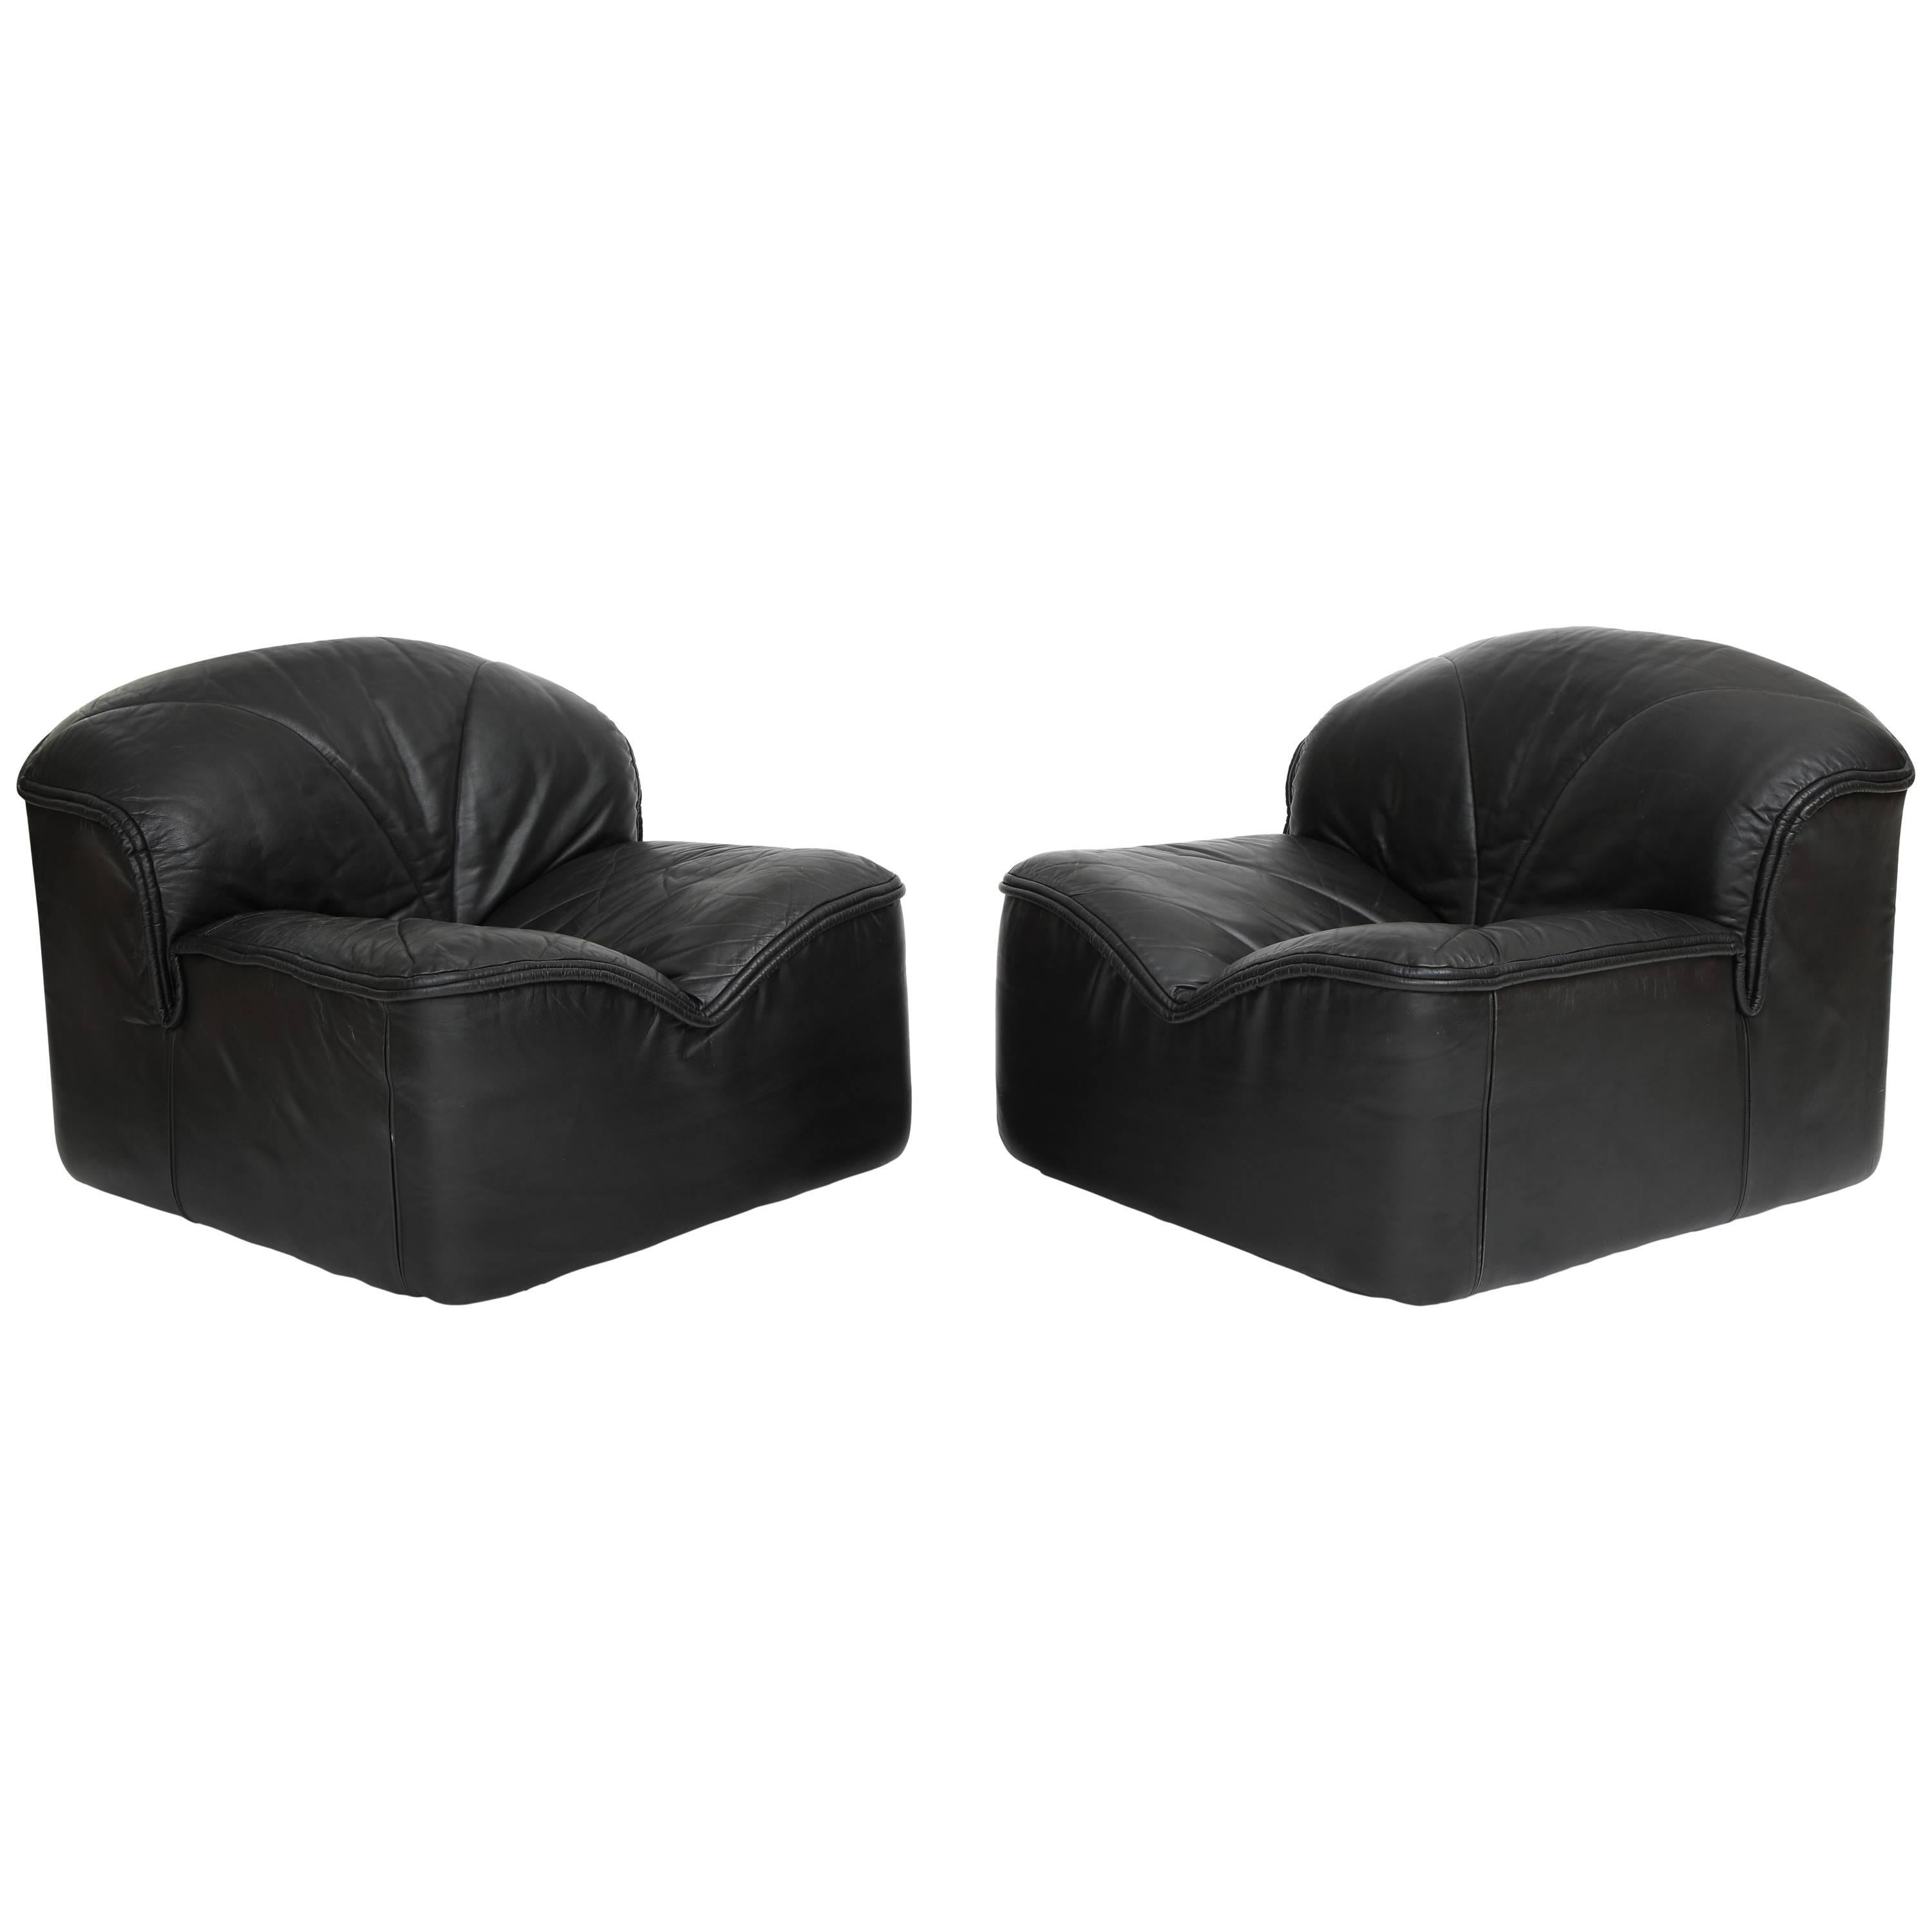 i4 Mariani Pace Postmodern Black Leather Pair of Lounge Chairs, 1970s-1980s